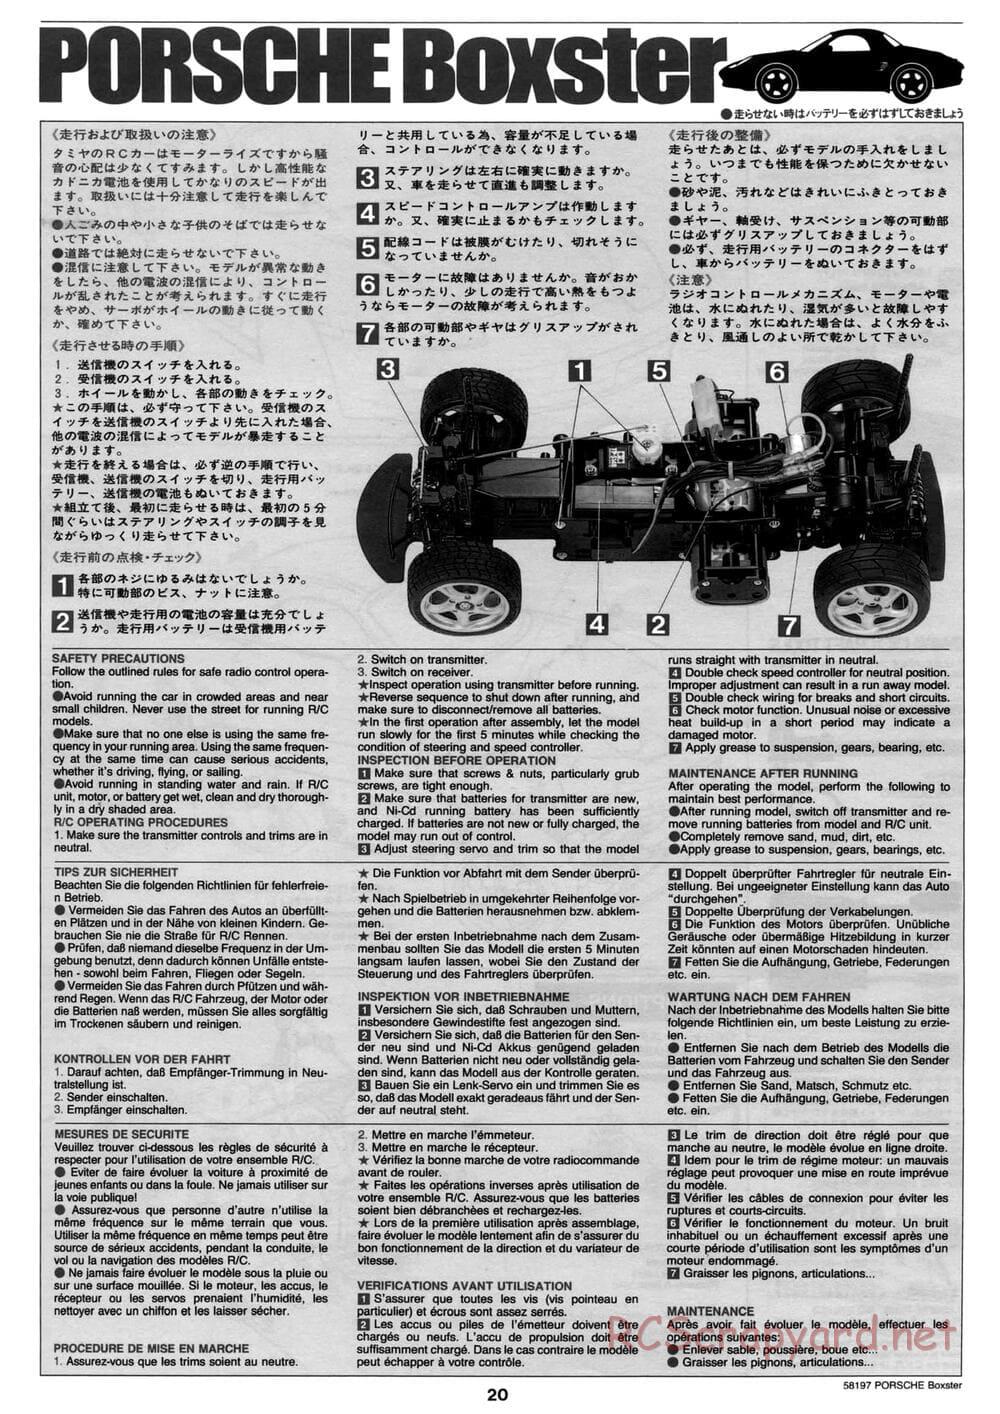 Tamiya - Porsche Boxster - M02L Chassis - Manual - Page 20